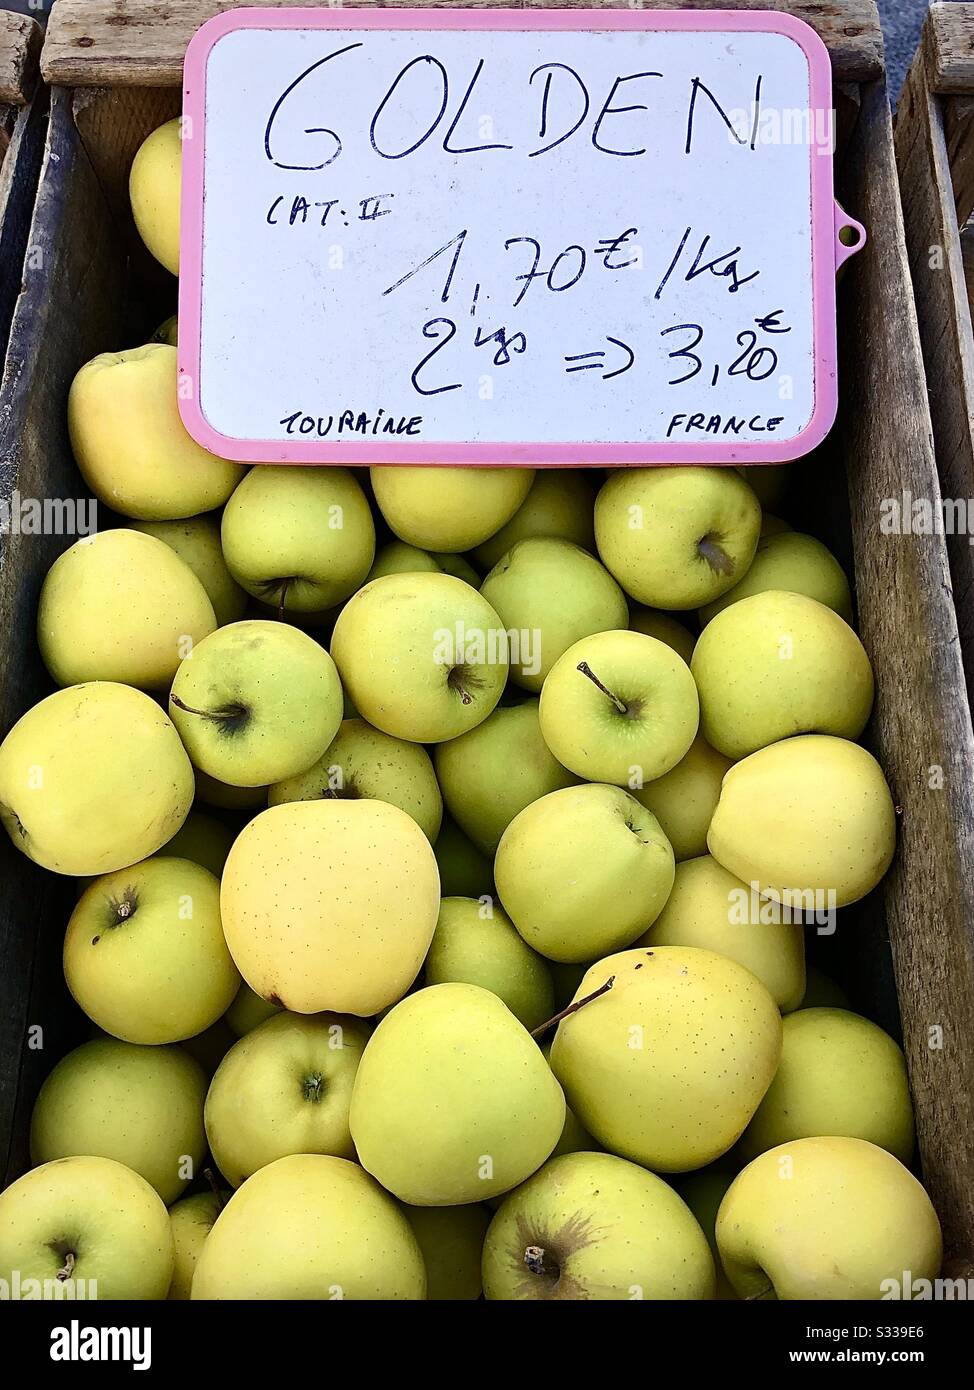 Golden Delicious apples on French market stall. Stock Photo